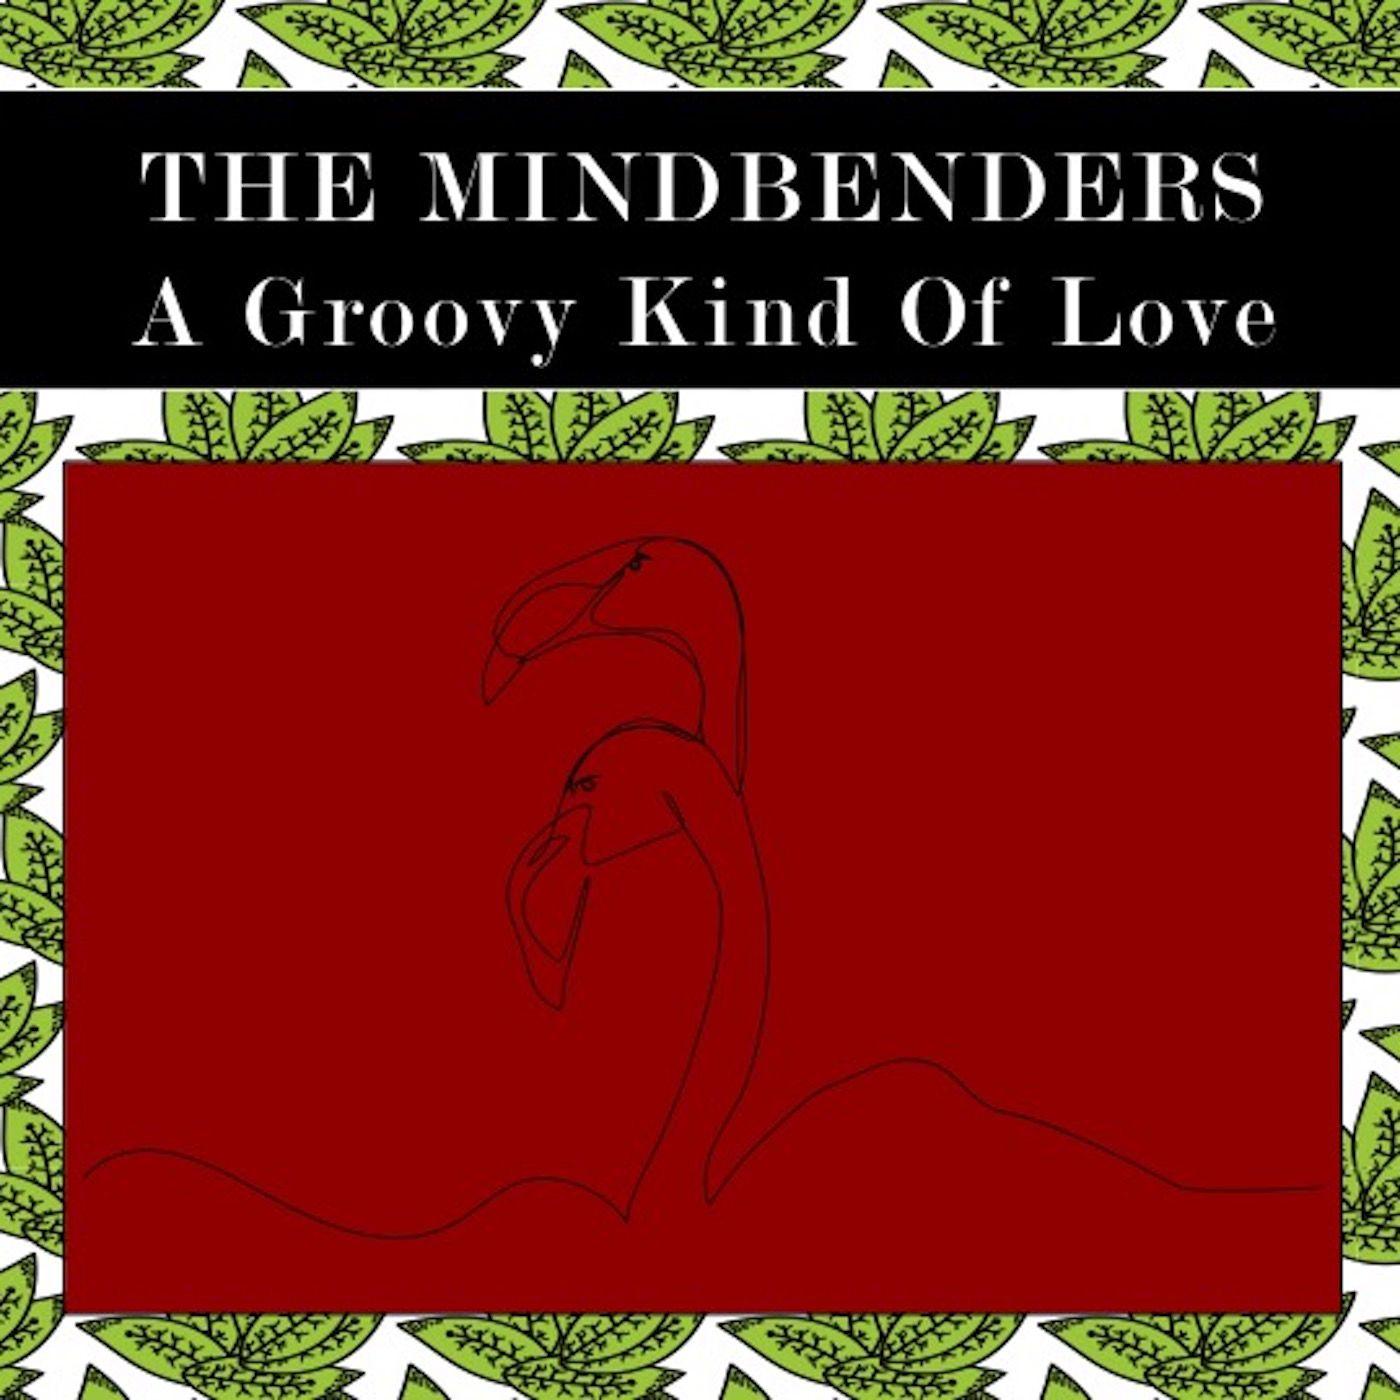 A Groovy Kind of Love (Mindbending Stereo Mix)